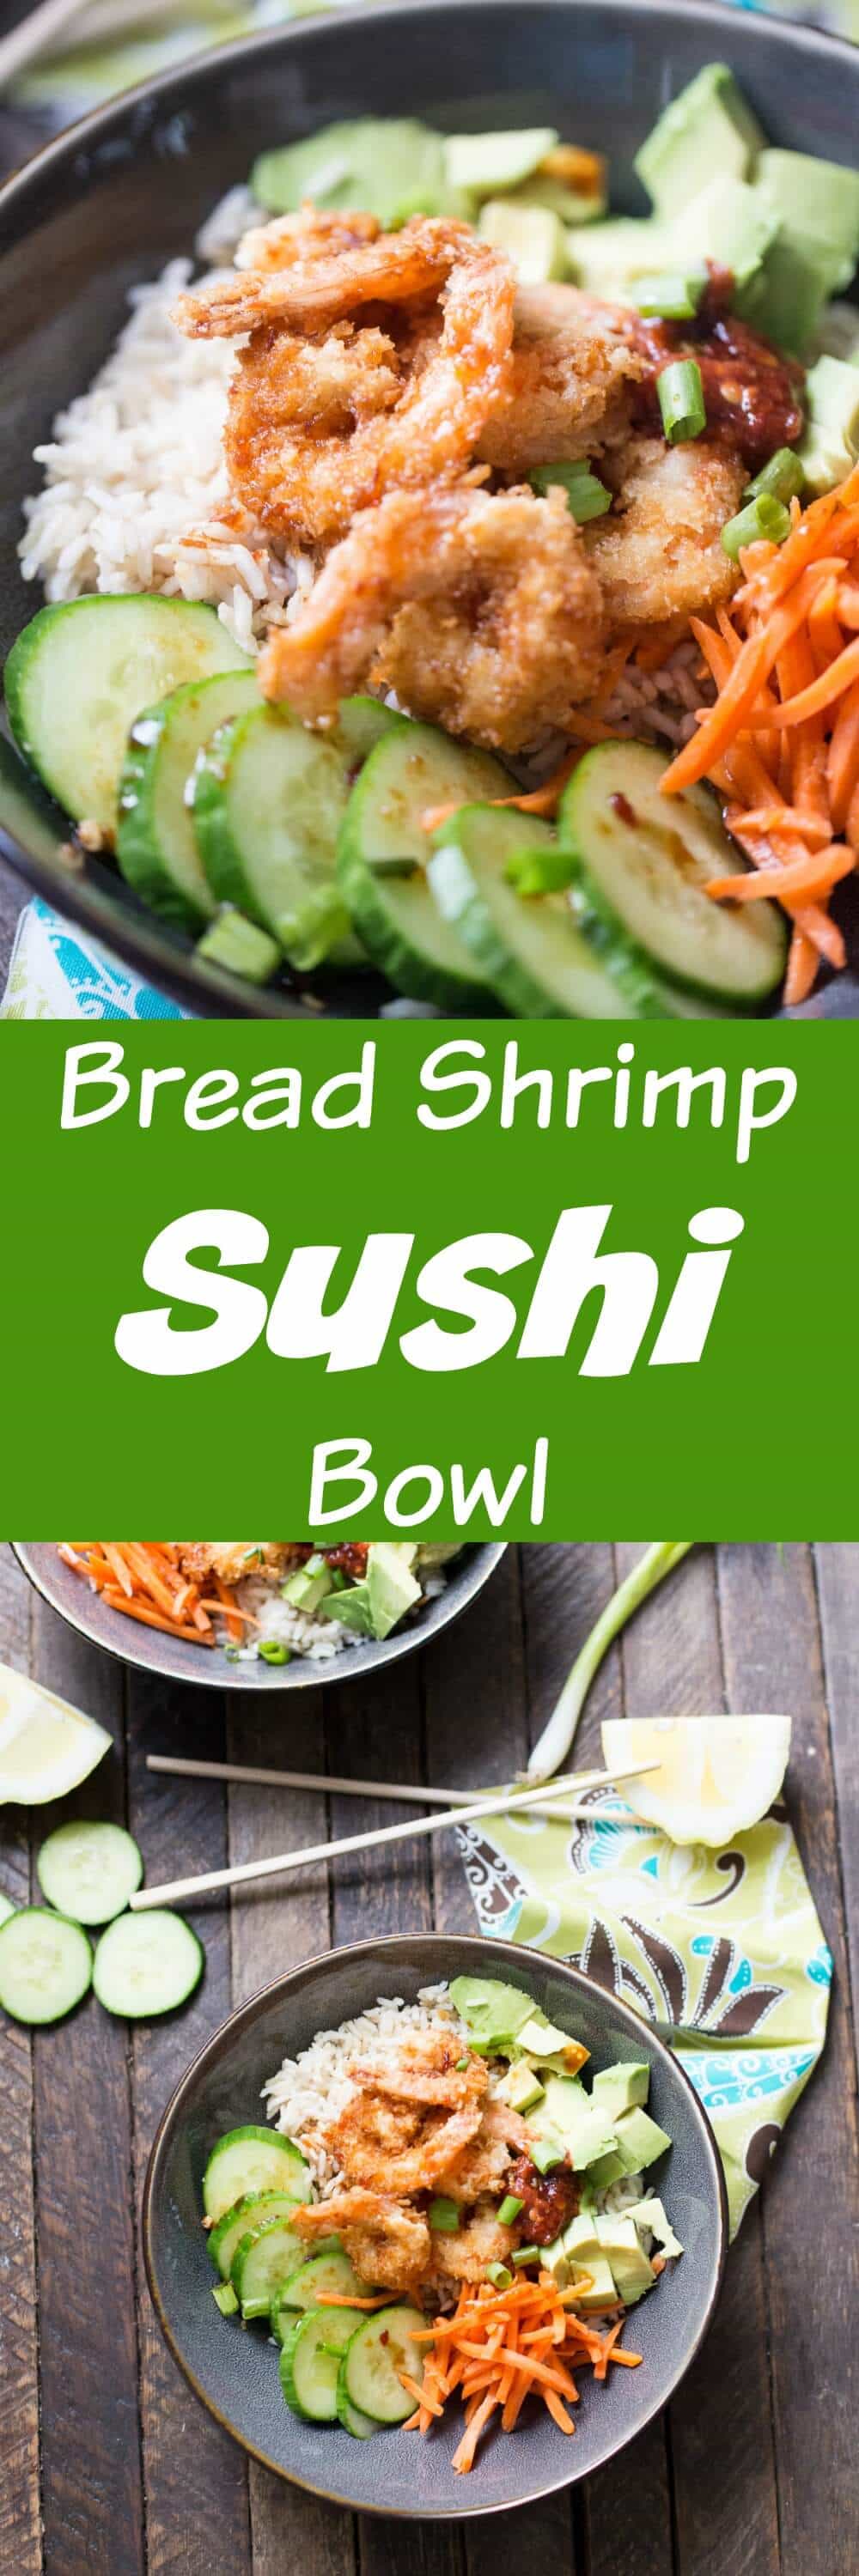 Want sushi but don’t want to go out to get it? Cook up some breaded shrimp and make a sushi bowl at home! This bowl has the flavors of sushi, but it easy, filling and you can make it at home!